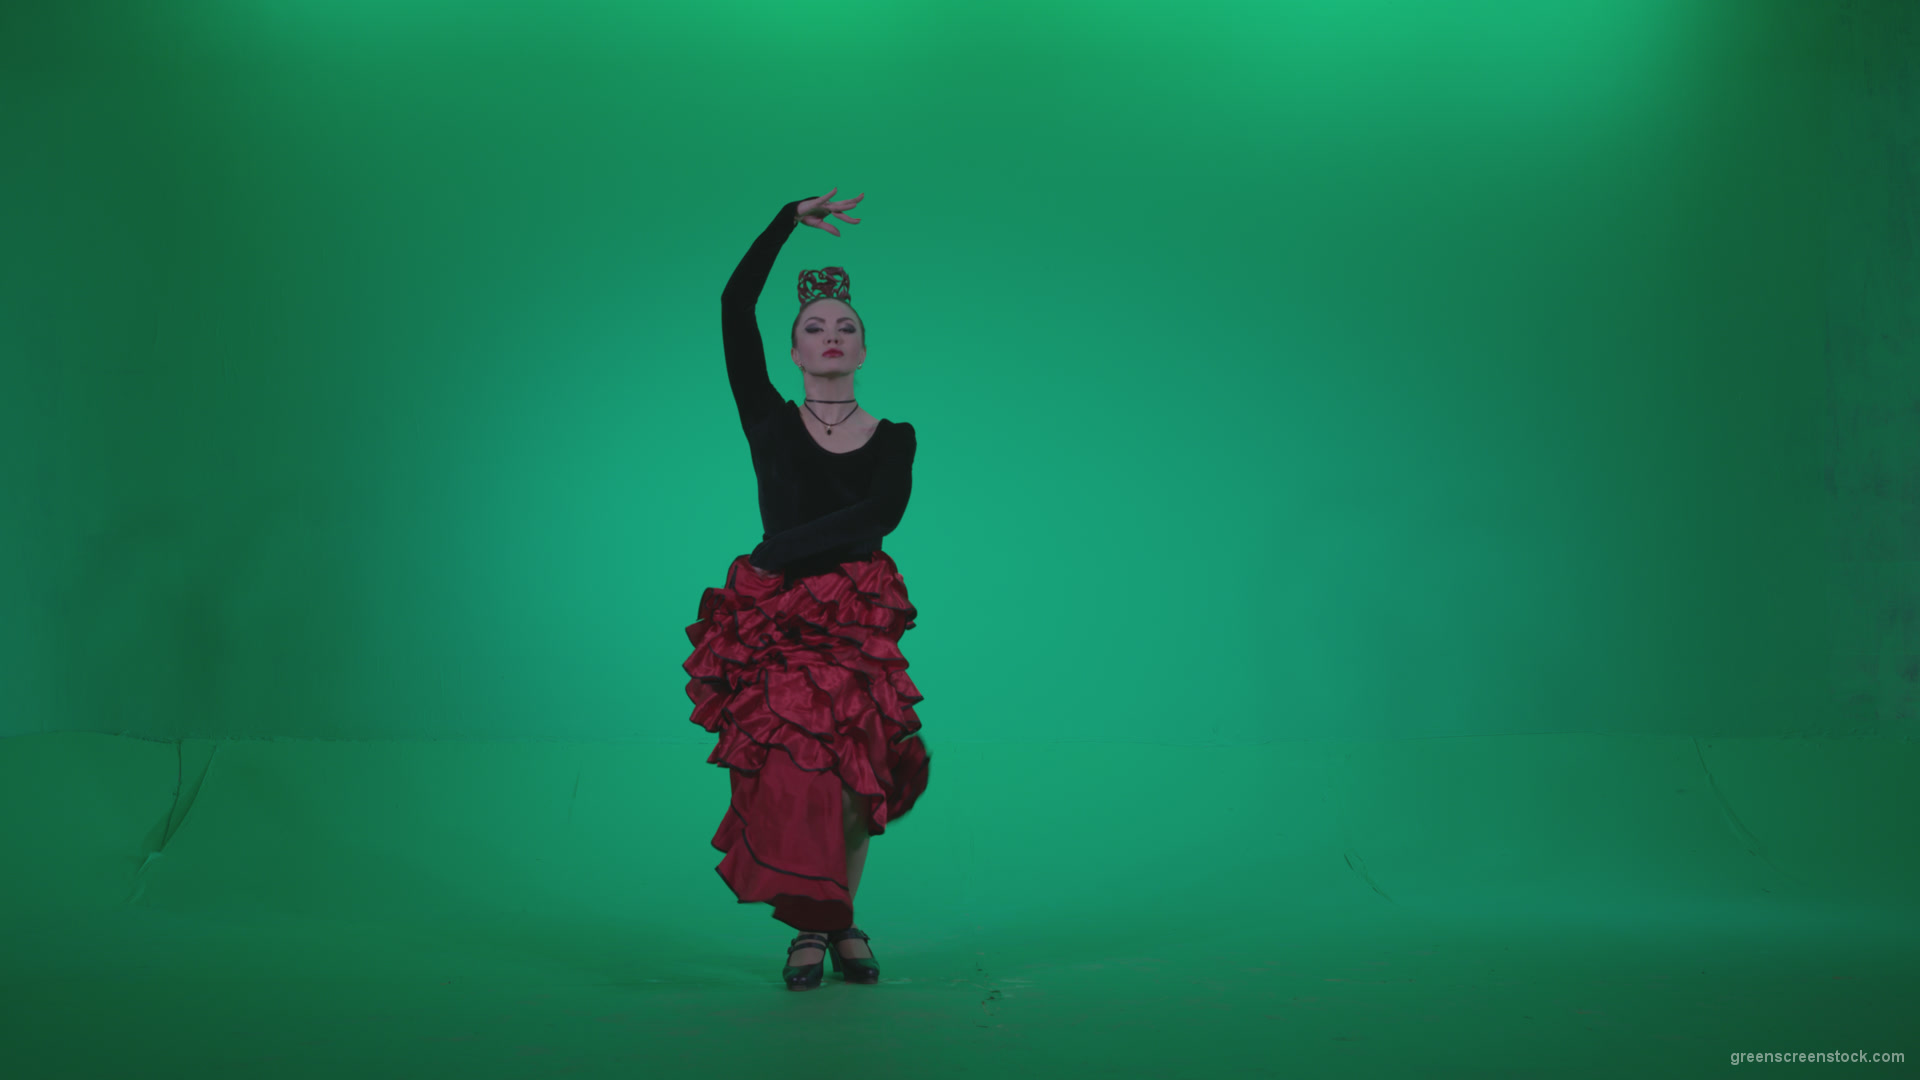 Flamenco-Red-and-Black-Dress-rb6-Green-Screen-Video-Footage_008 Green Screen Stock